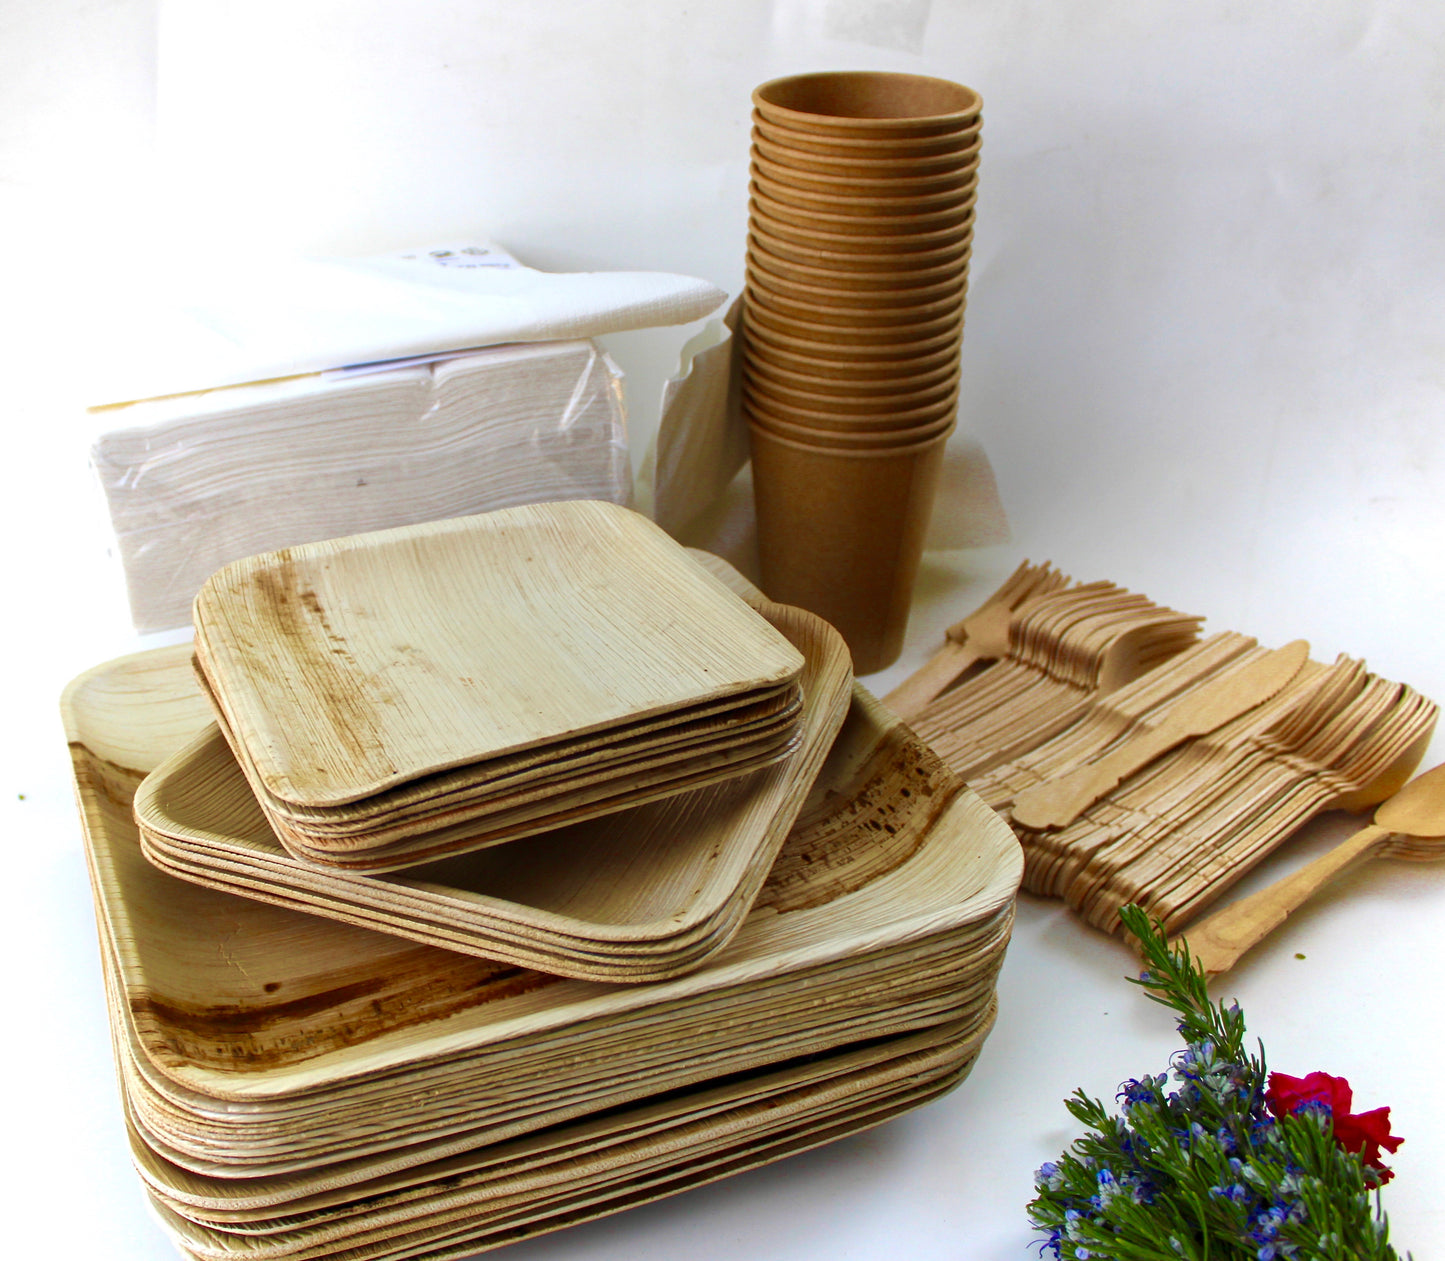 Bamboo Type Palm Leaf 25 Pic 10"Square  - 25 pice Square deep  6"- 25  pic  cup  - 75 pic Cutlery - 50 Pic Napkin